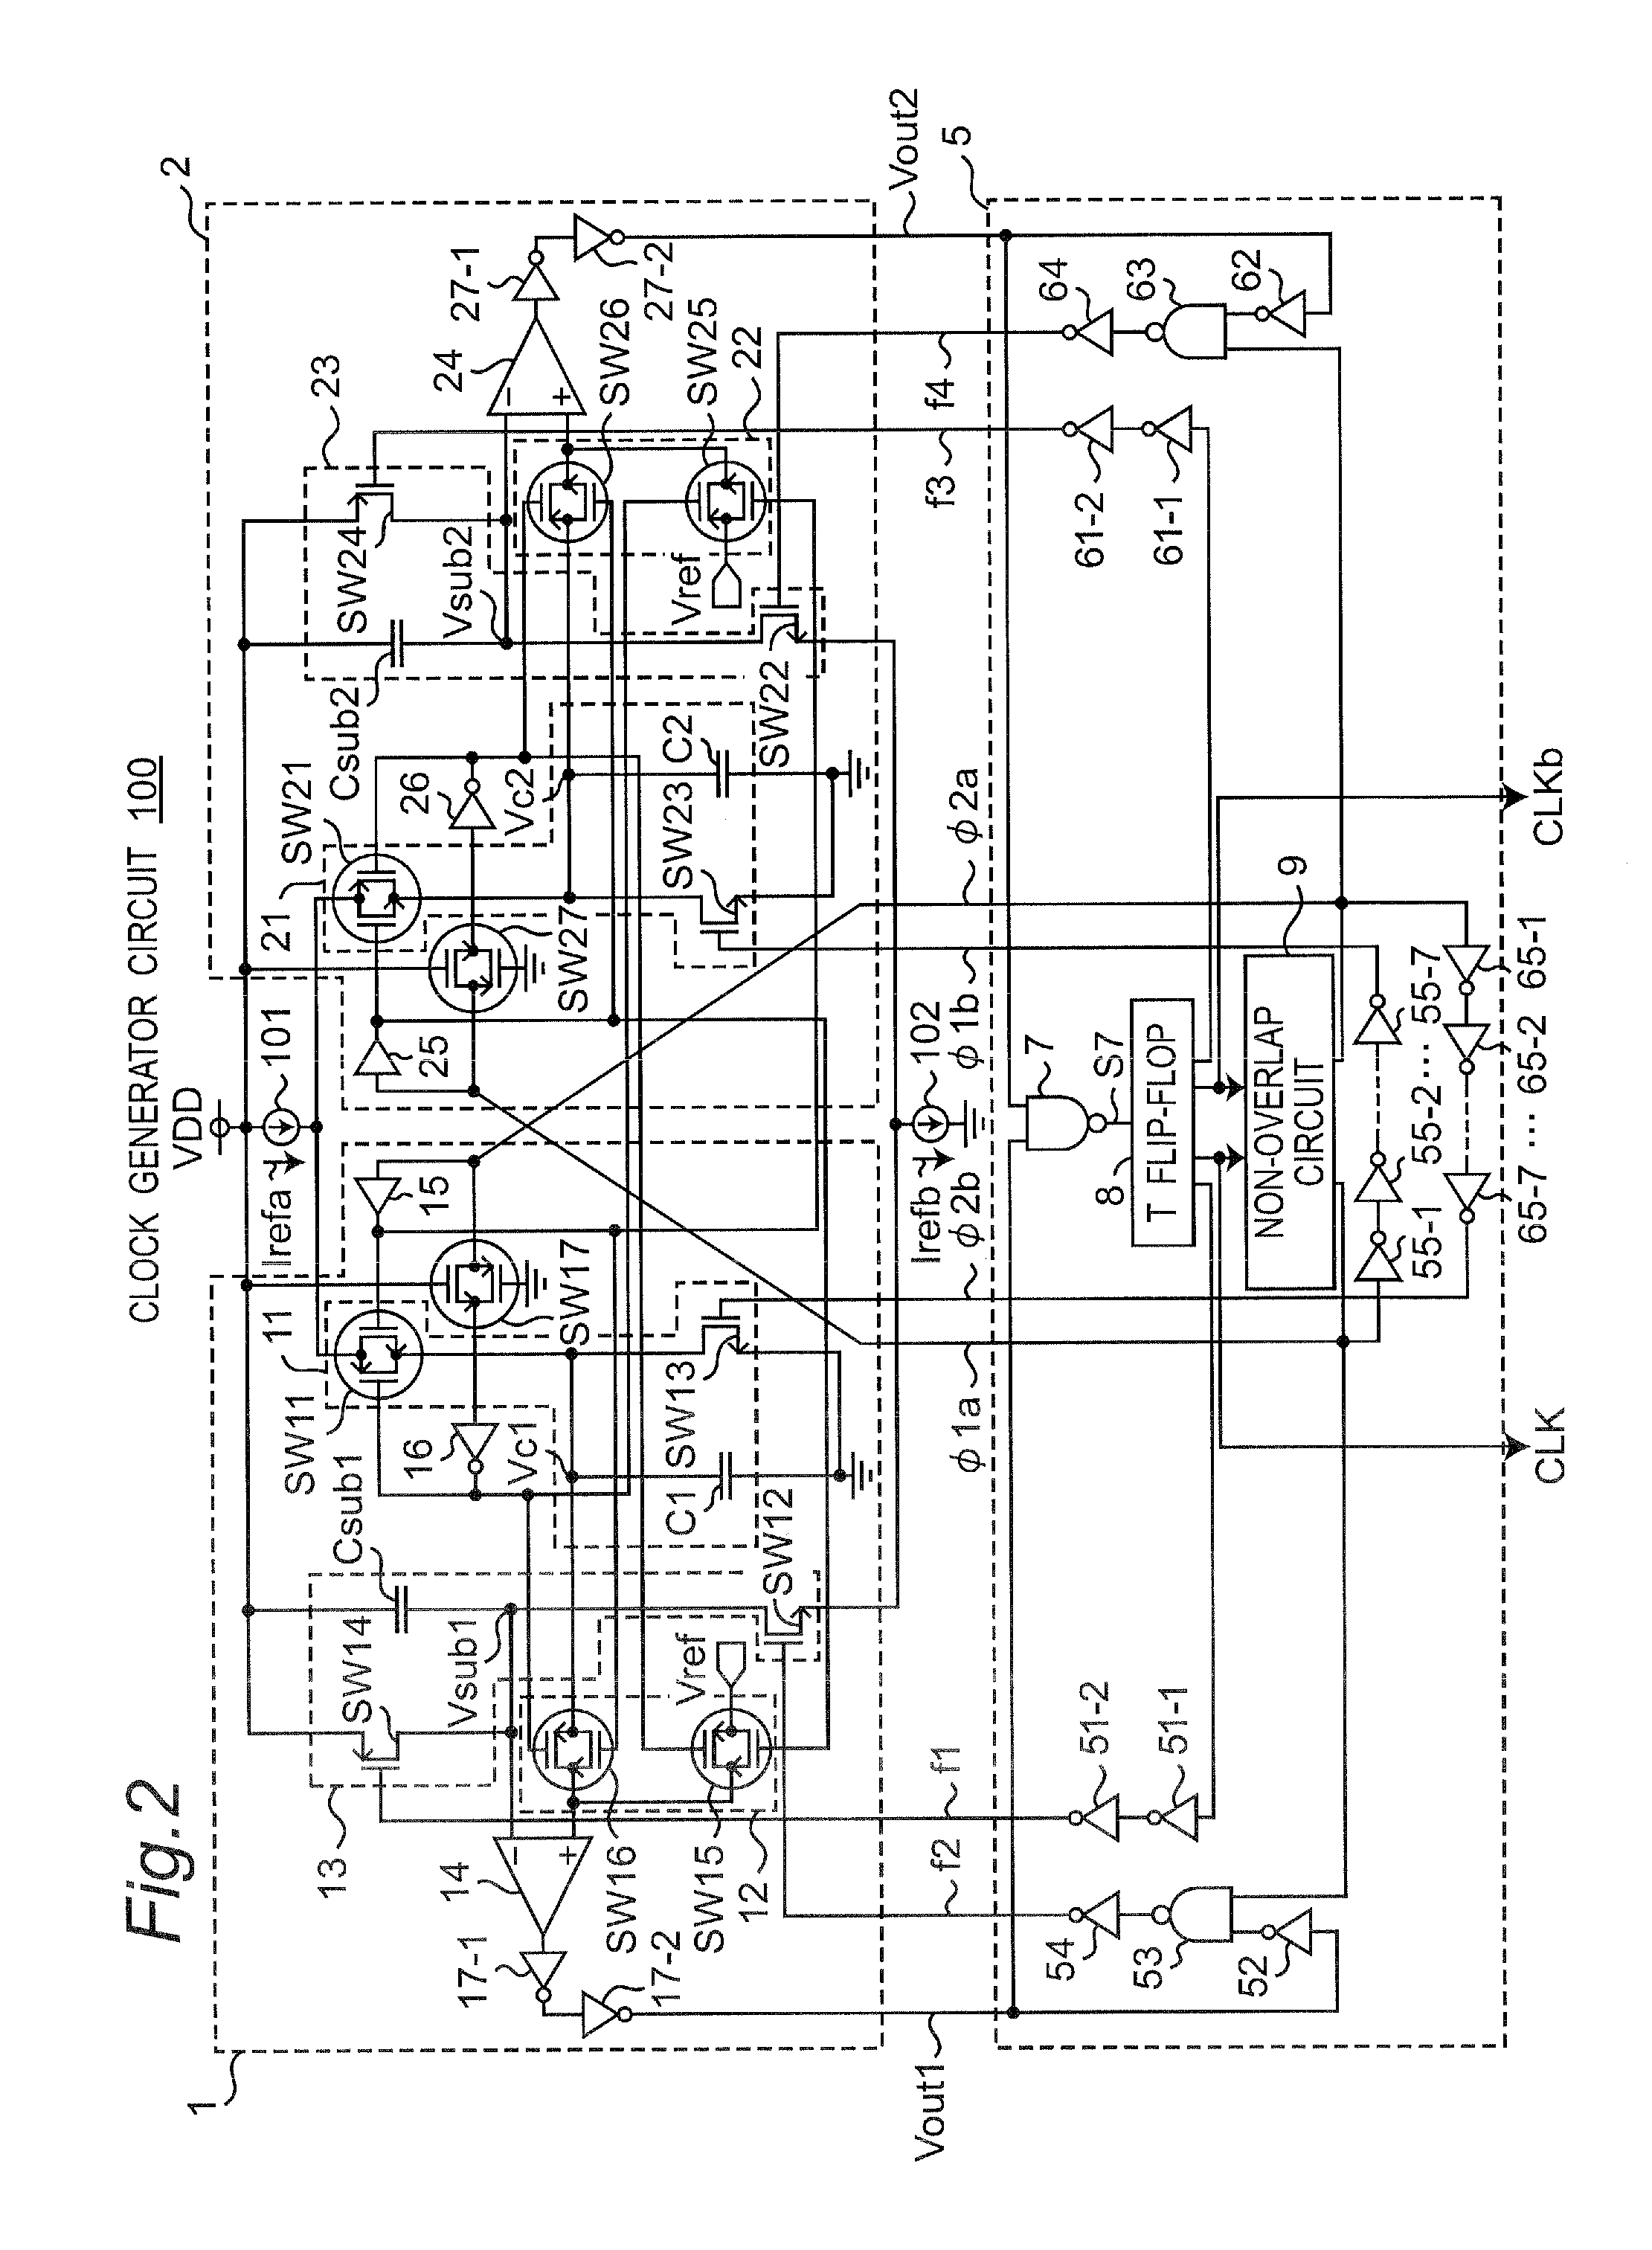 Relaxation oscillator circuit including two clock generator subcircuits having same configuration operating alternately